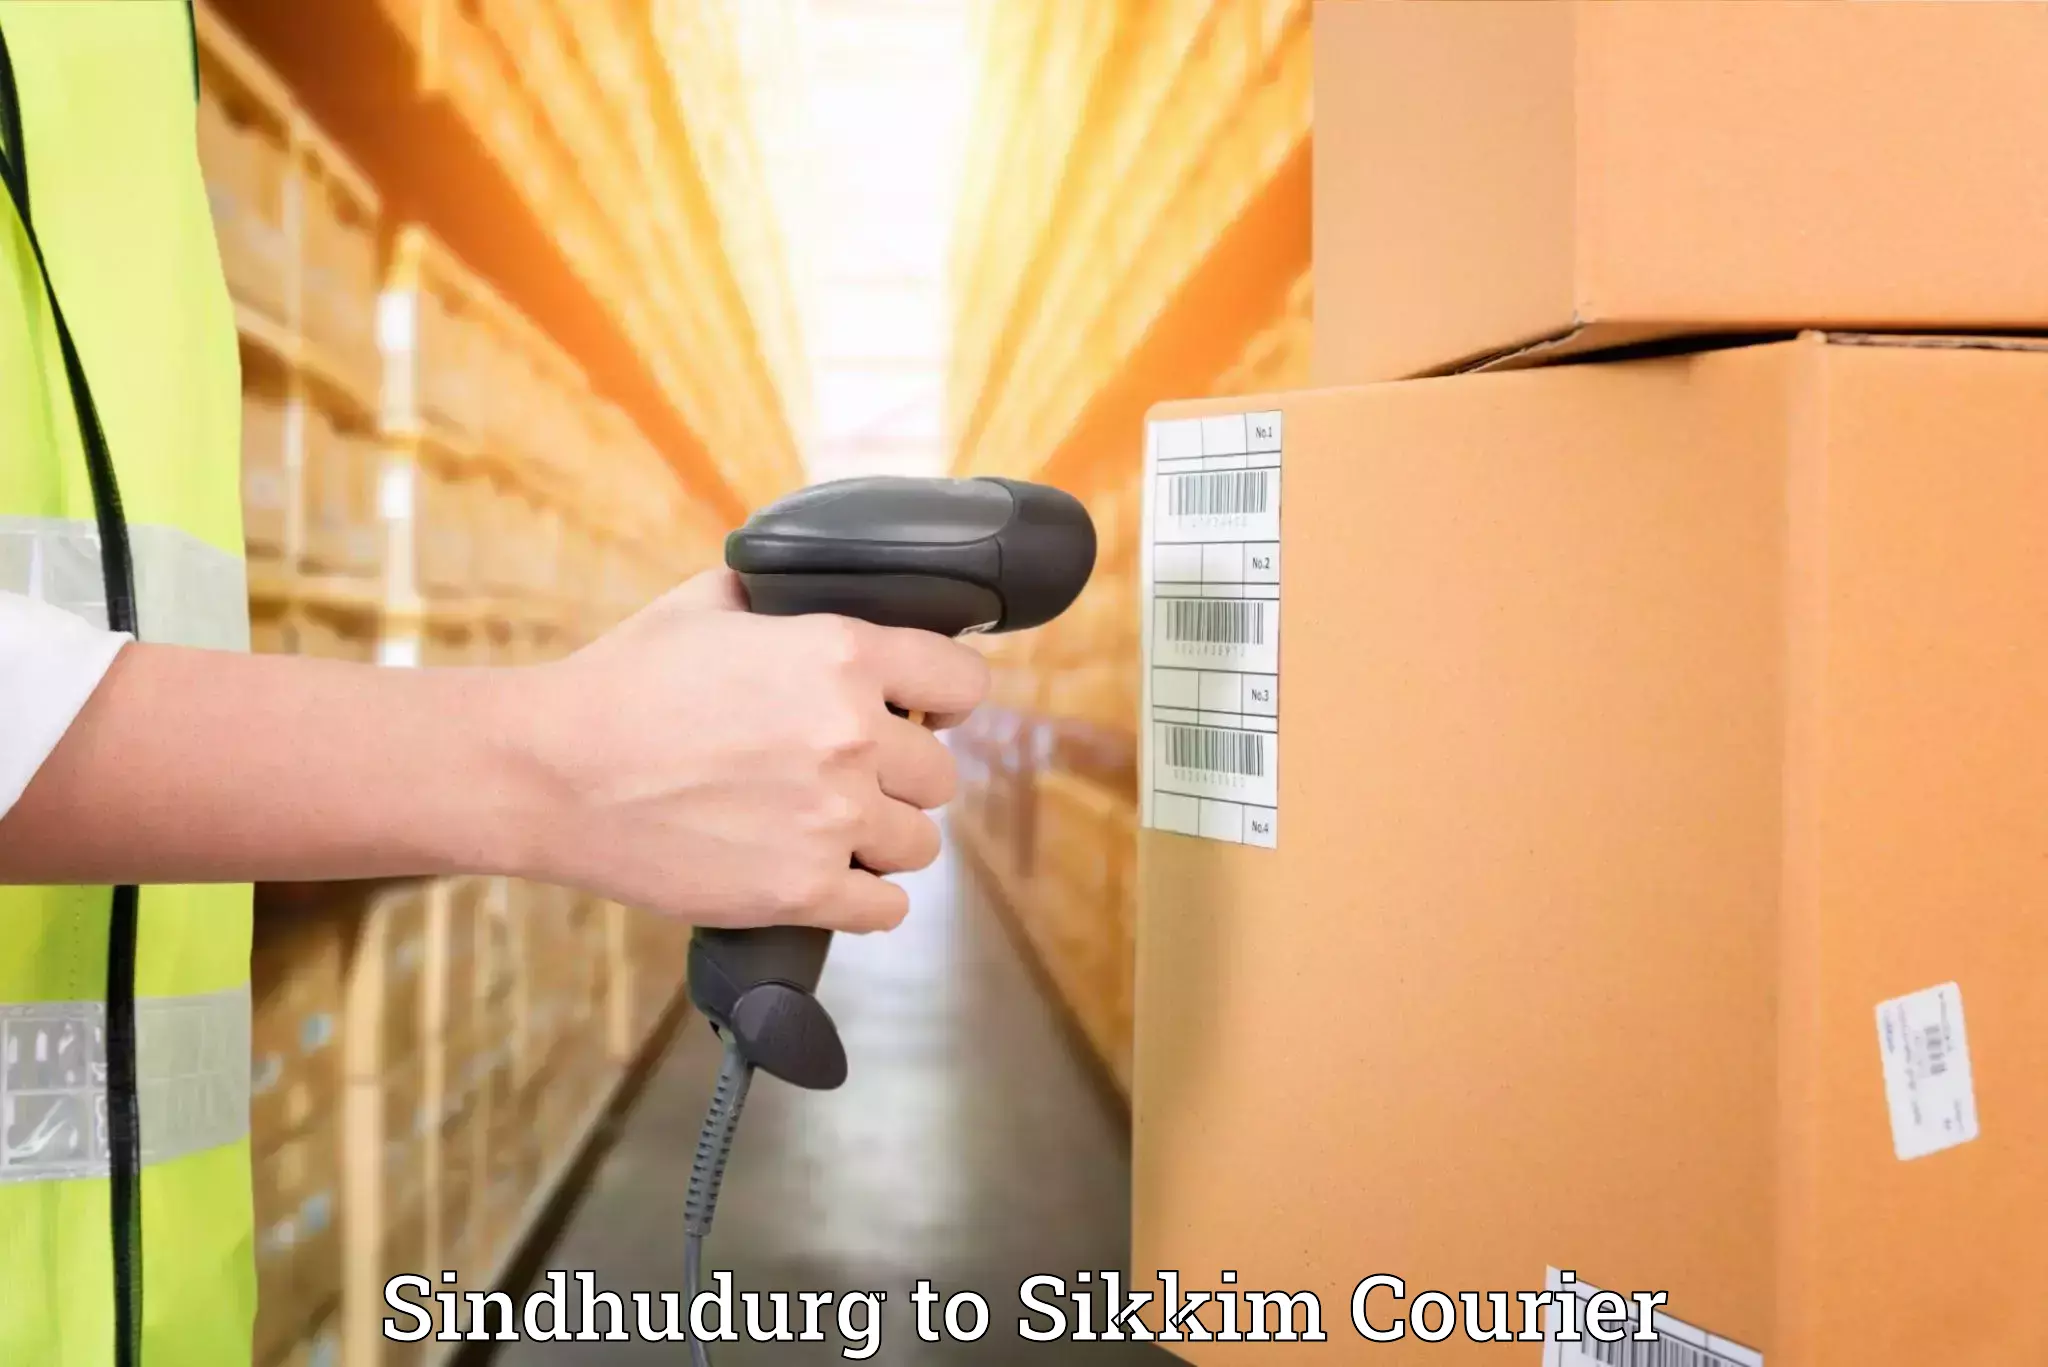 Expert goods movers Sindhudurg to Pelling